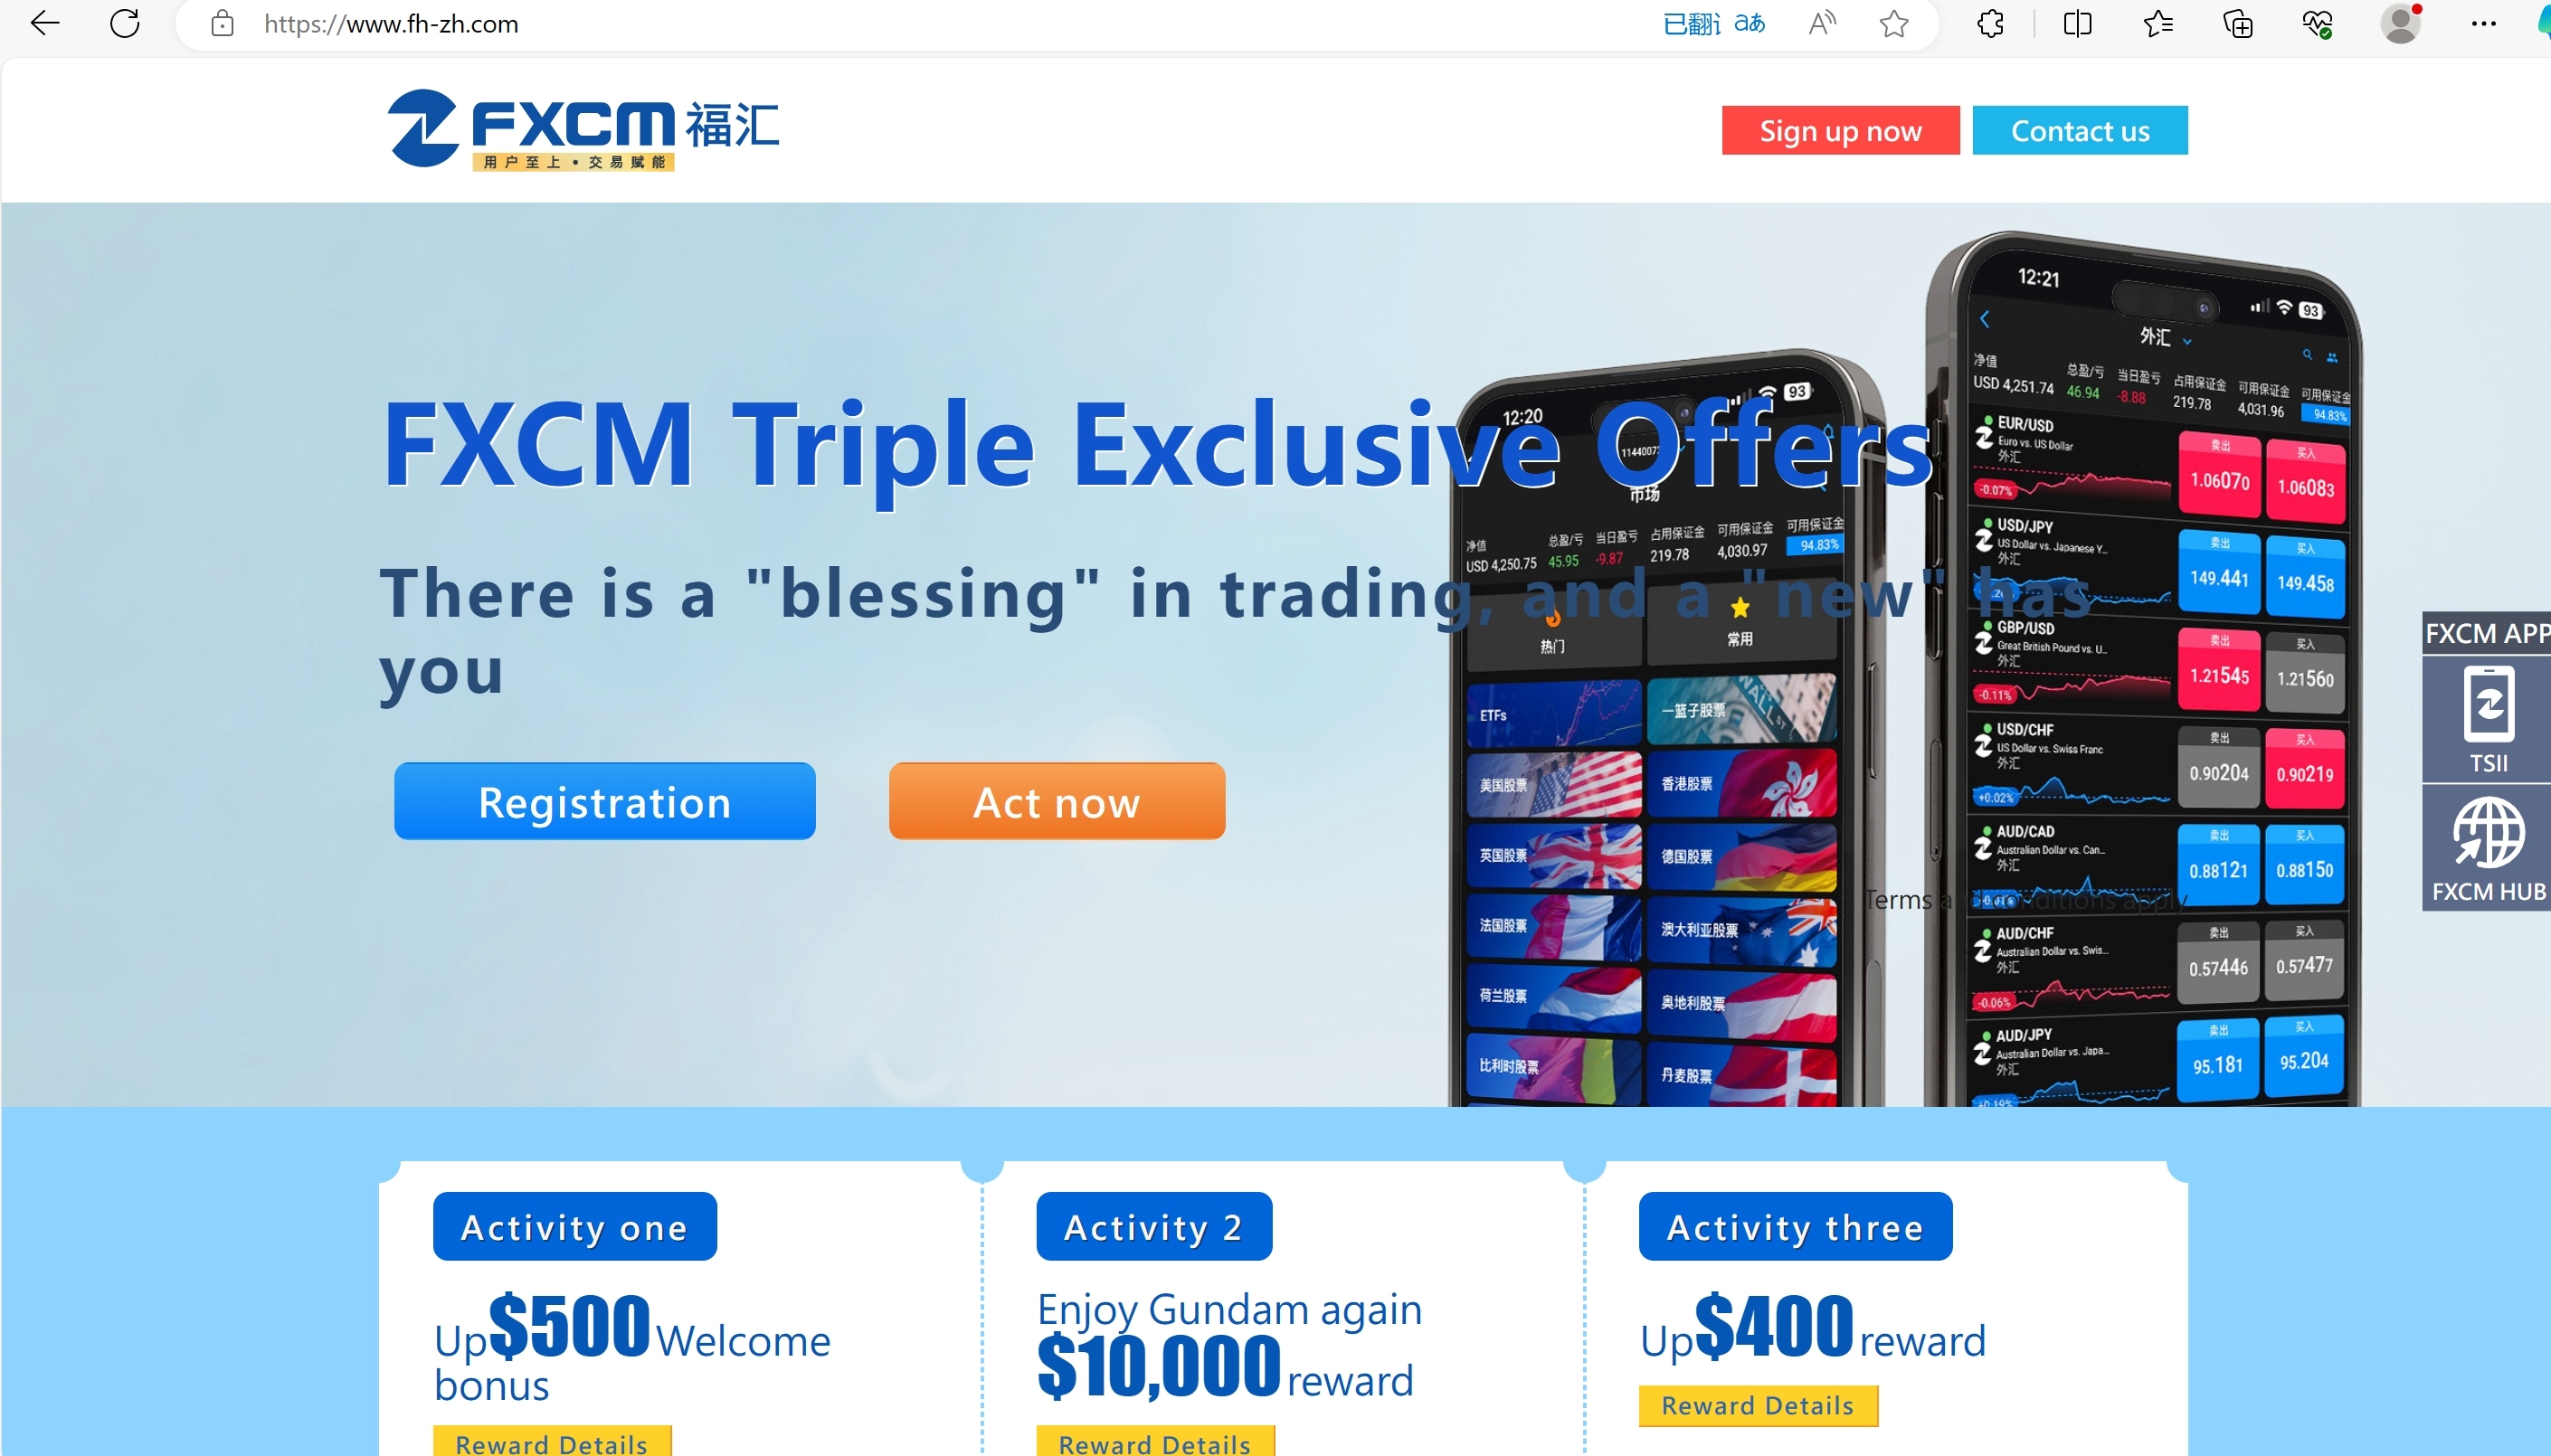 FXCM's home page